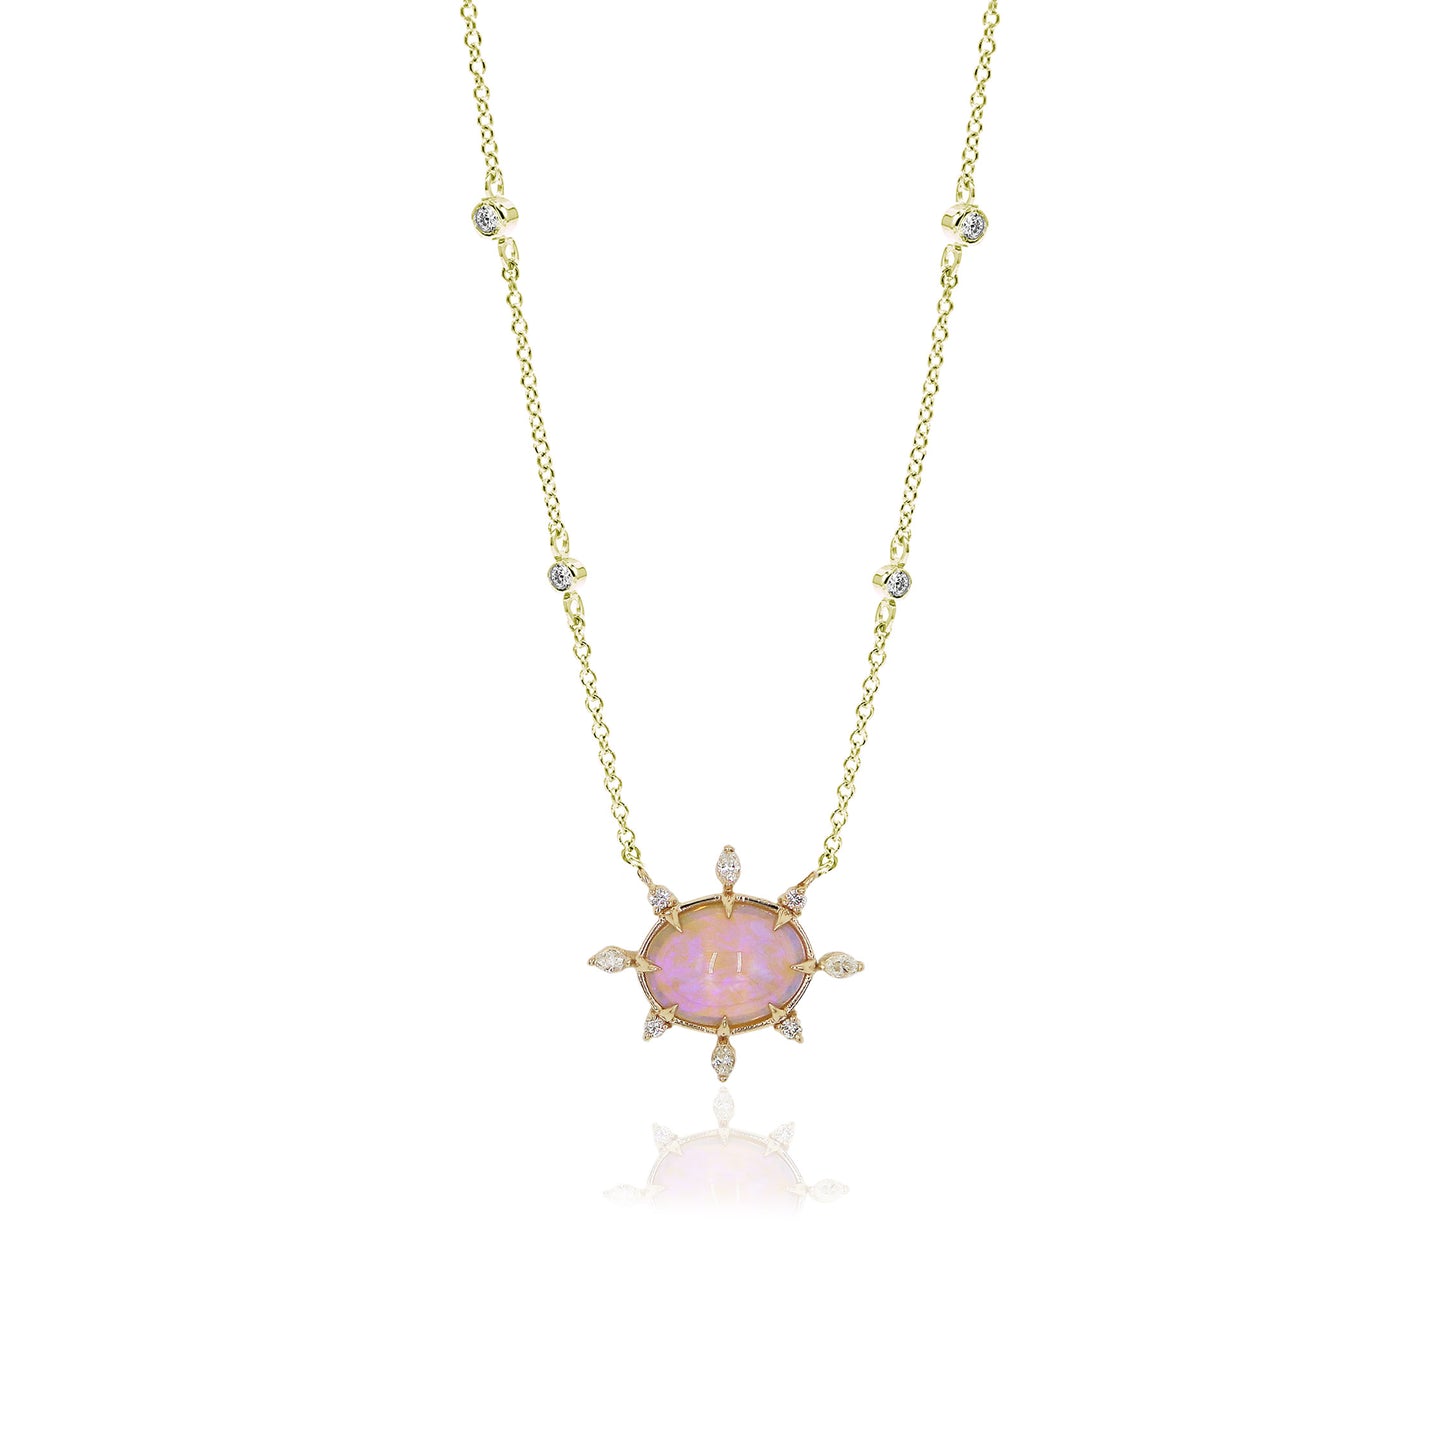 Load image into Gallery viewer, Lightning Ridge Opal Necklace
